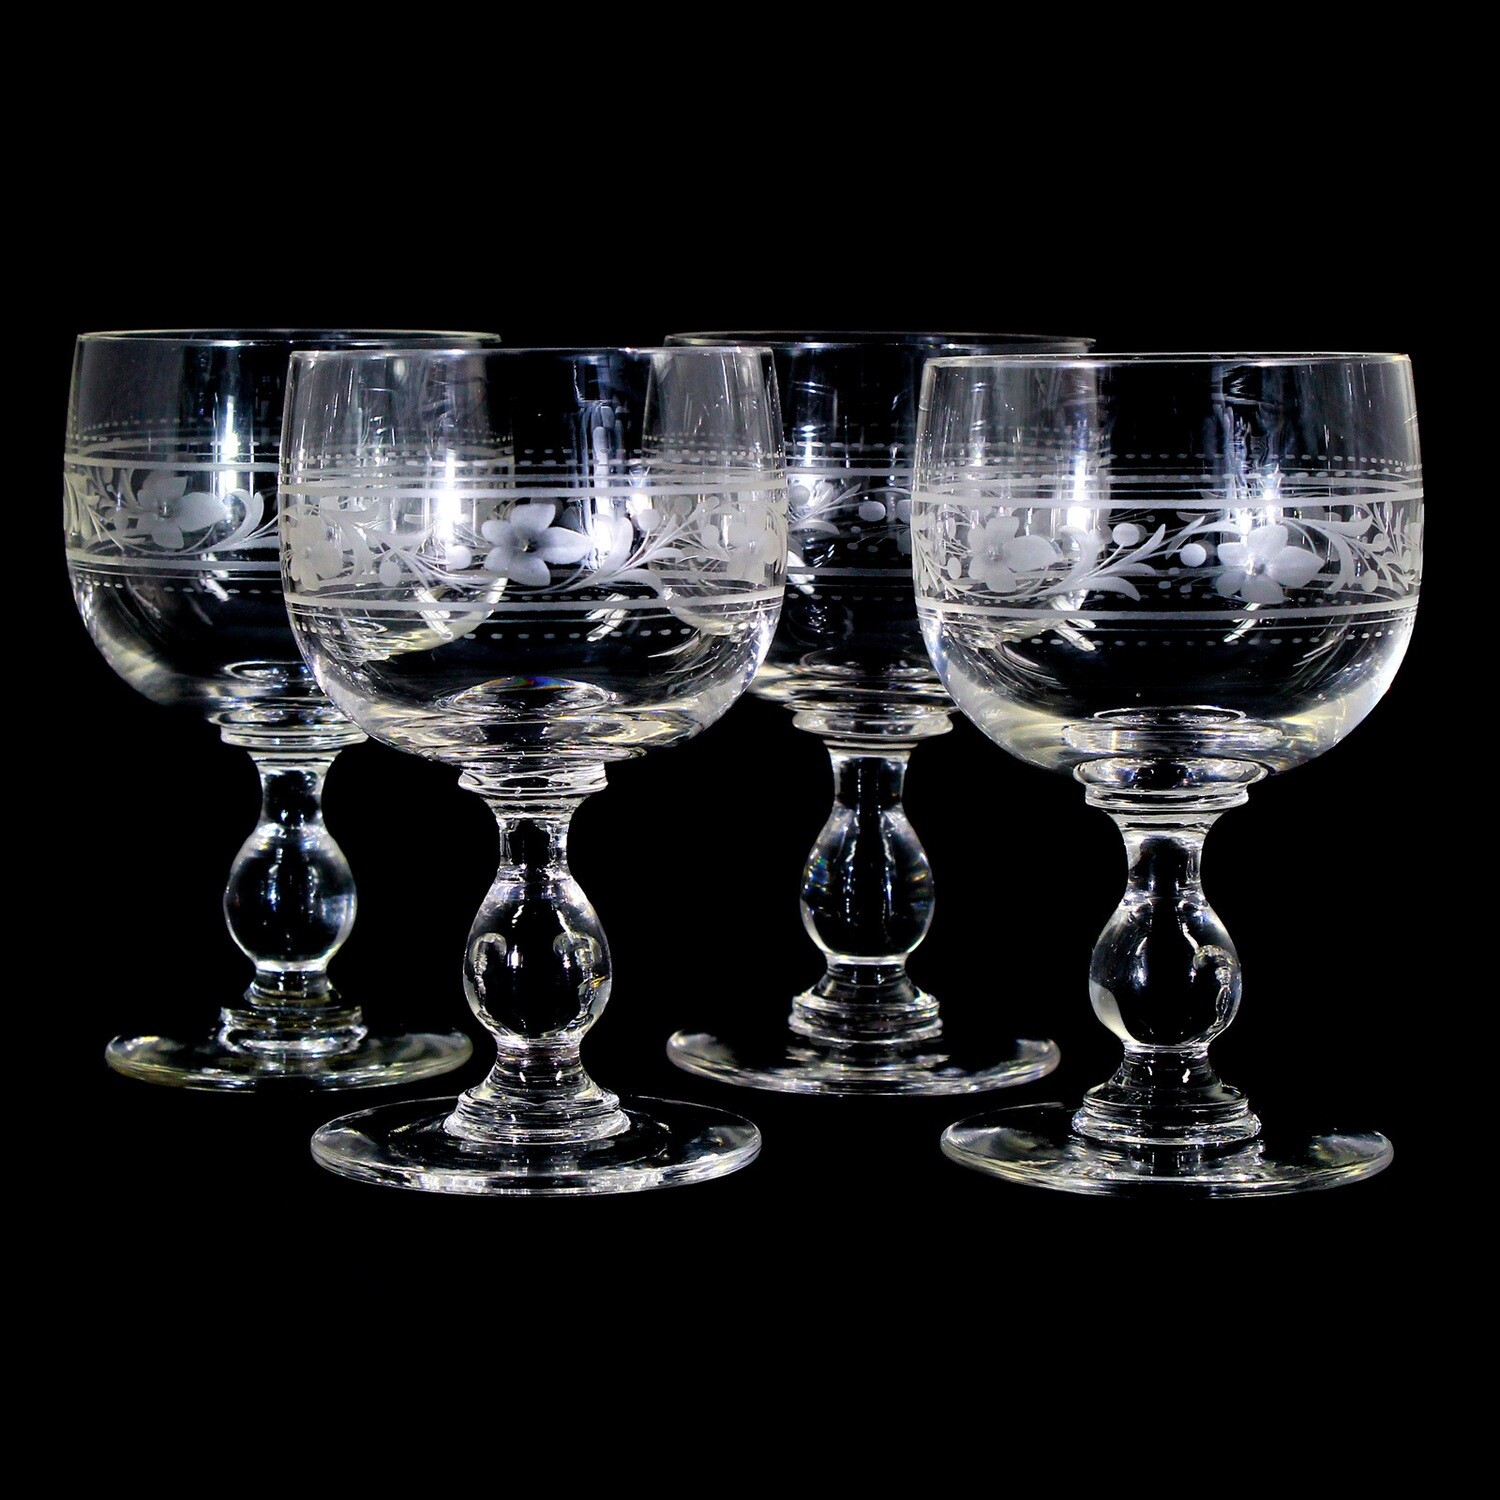 4 wine glasses made of colorless crystal glass with decorative cut decoration, around 1900.